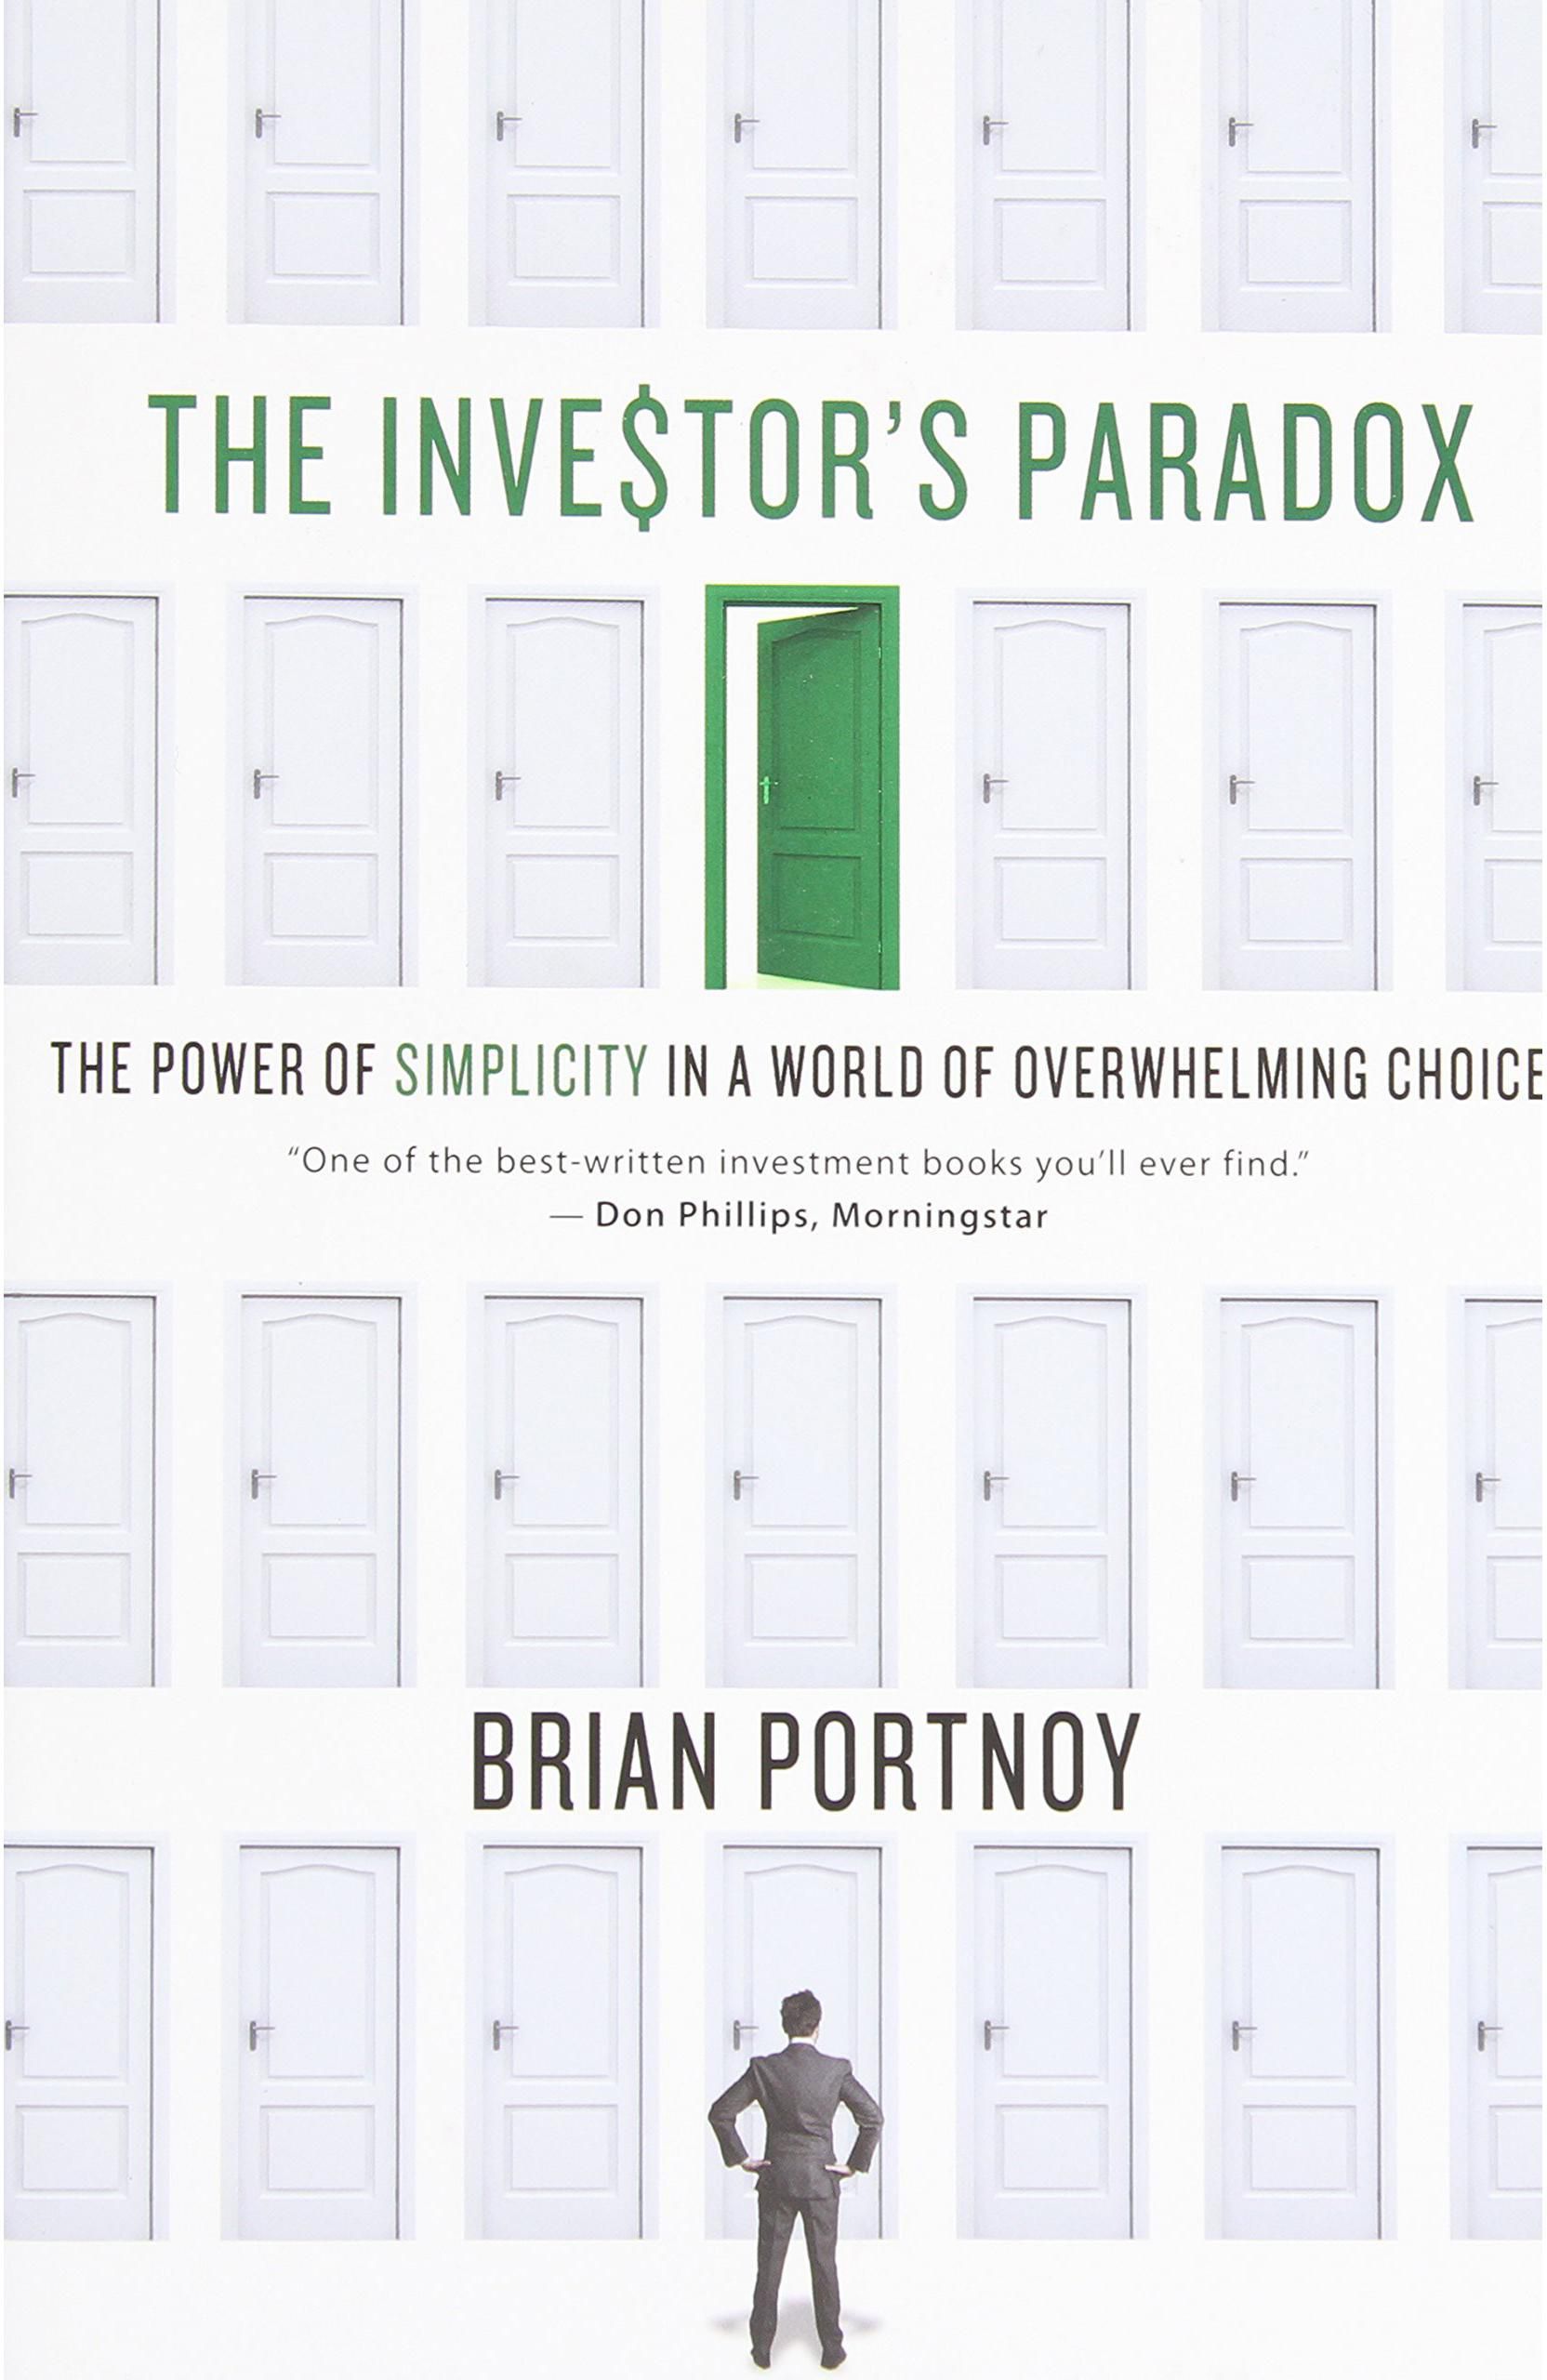 The Investor's Paradox - The Power of Simplicity in a World of Overwhelming Choice